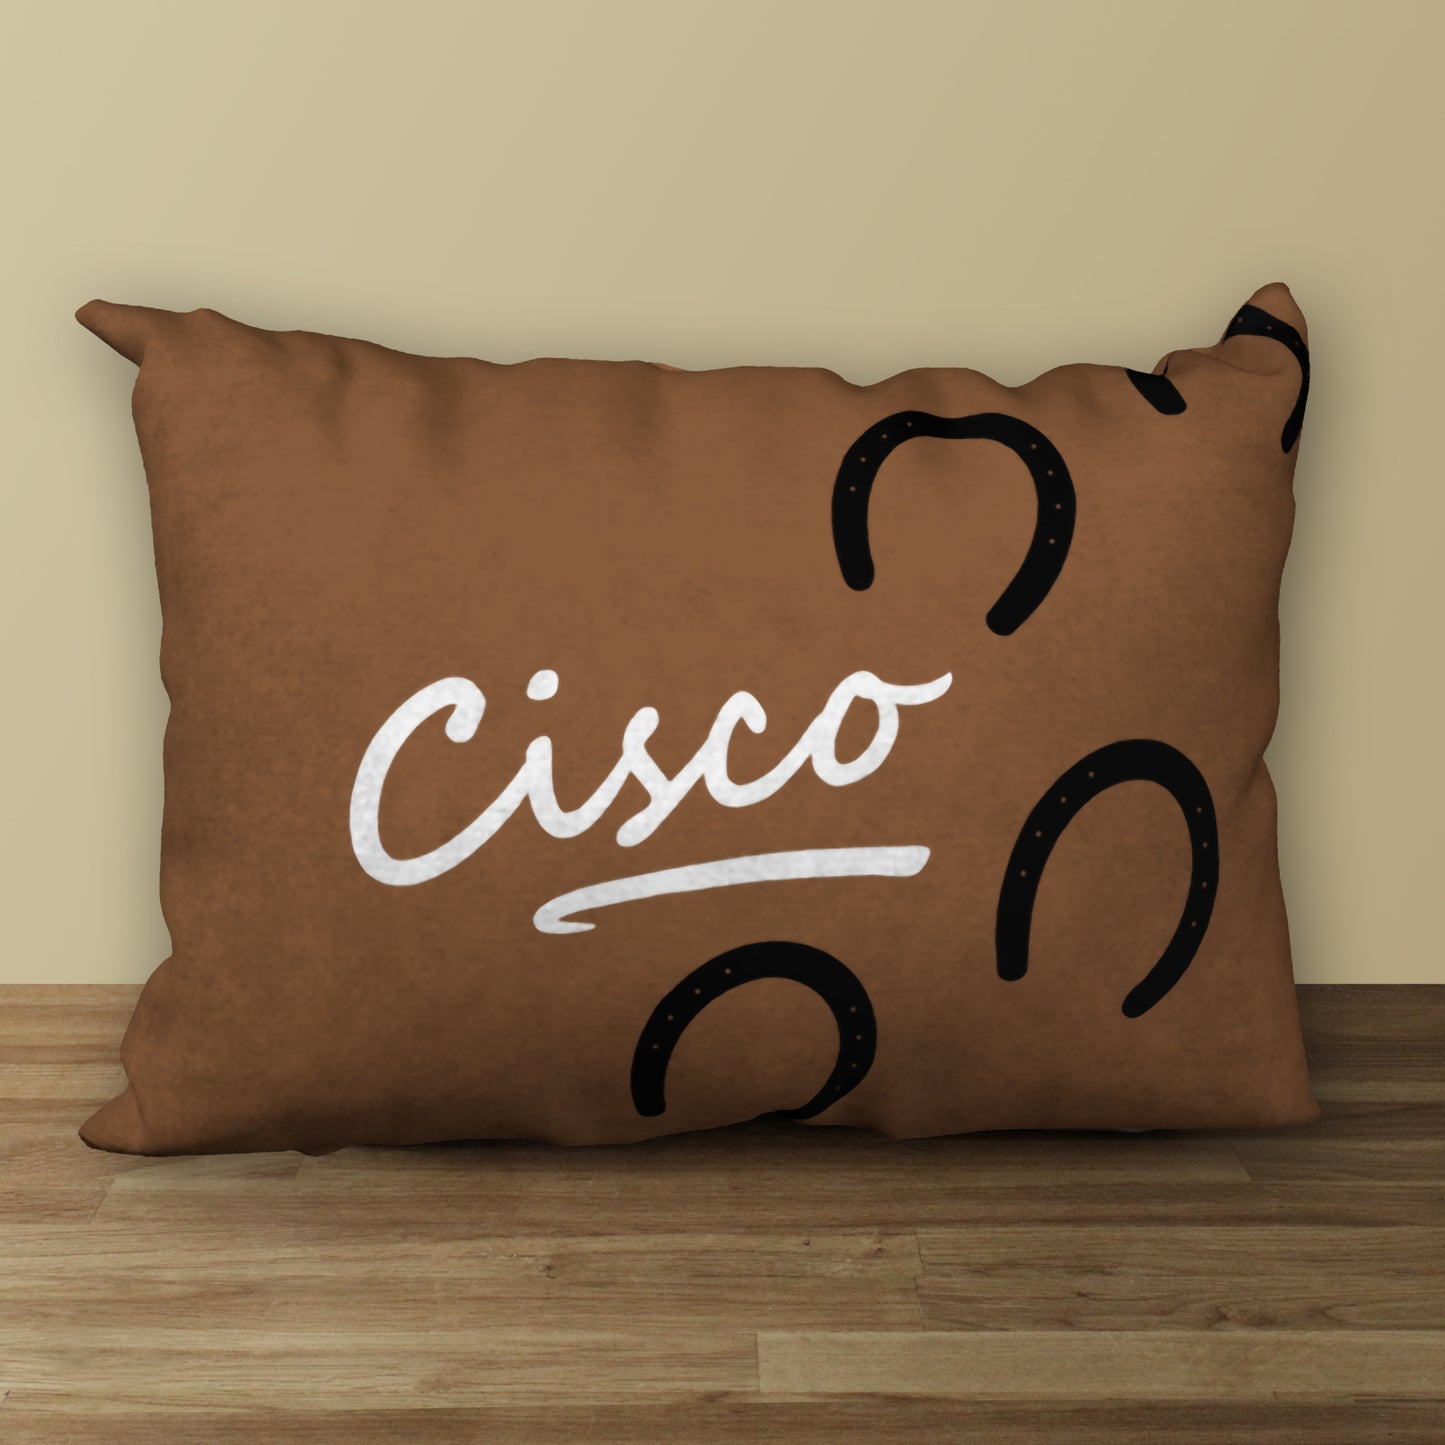 Personalized Pet Name Pillow, 20"x14"